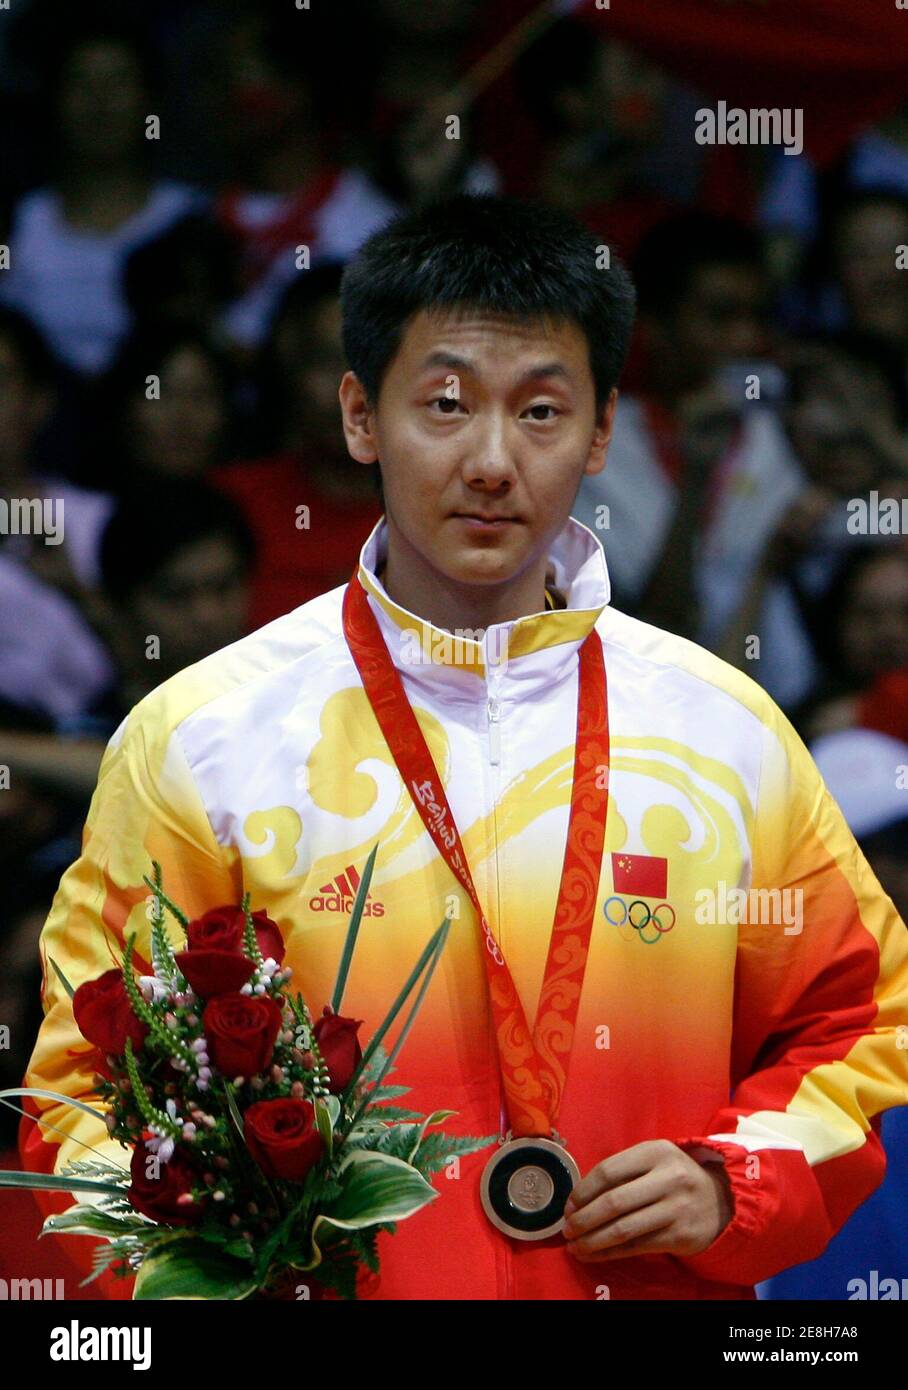 Chen Jin of China celebrates with his bronze medal during the medal ceremony for the men's badminton singles at the Beijing 2008 Olympic Games August 17, 2008.     REUTERS/Beawiharta (CHINA) Stock Photo